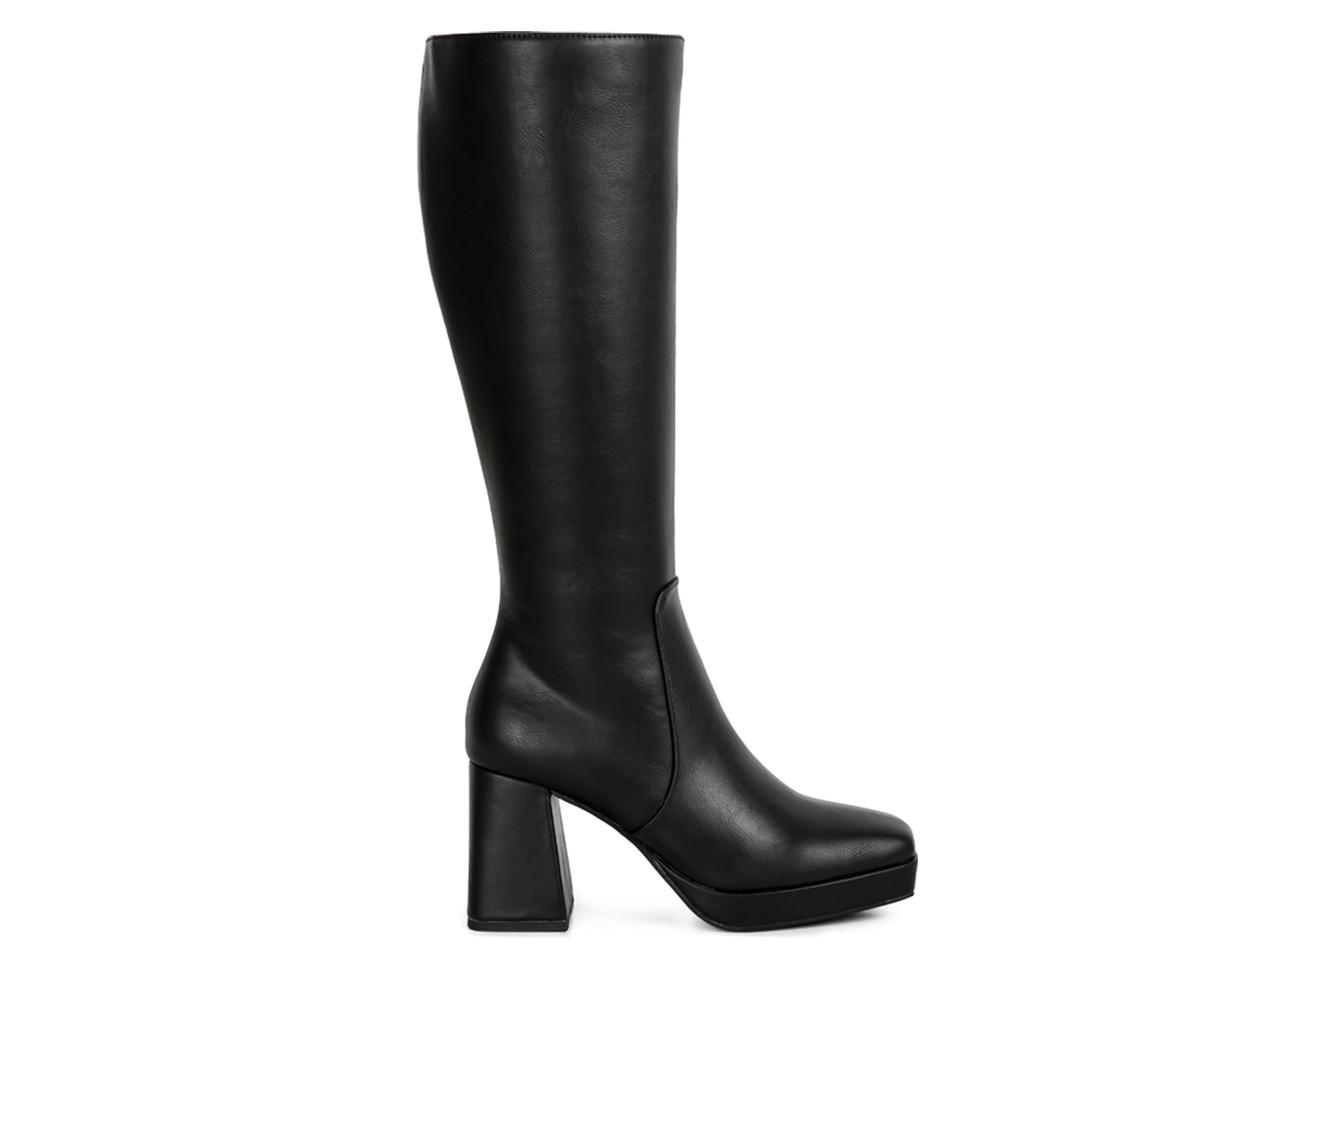 Women's London Rag Bouts Knee High Heeled Boots